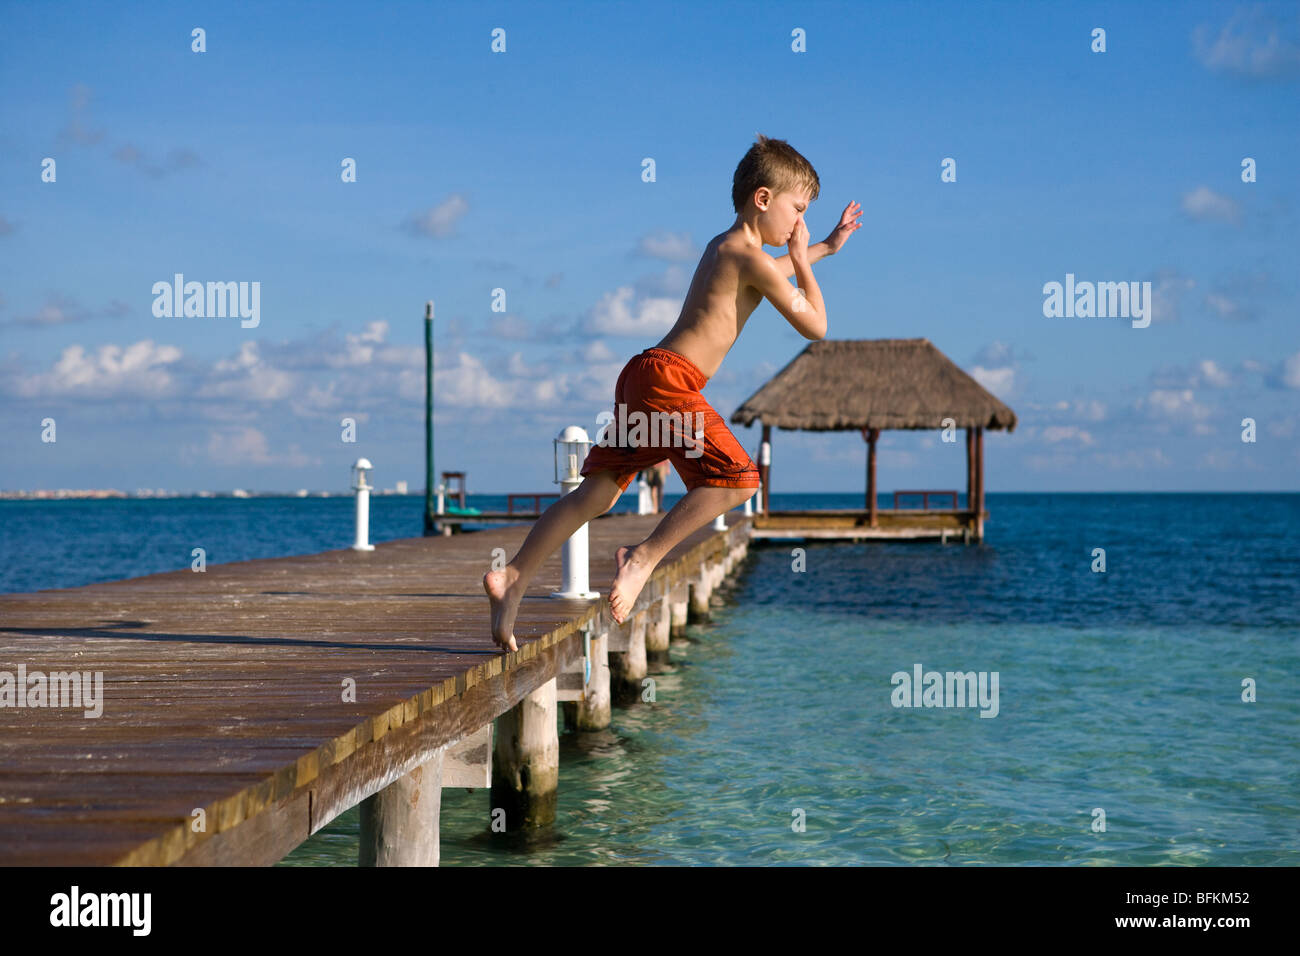 A Small Boy Jumps off a Dock at Club de international Cancun Mexico into the tropical waters off the Yucatan Stock Photo